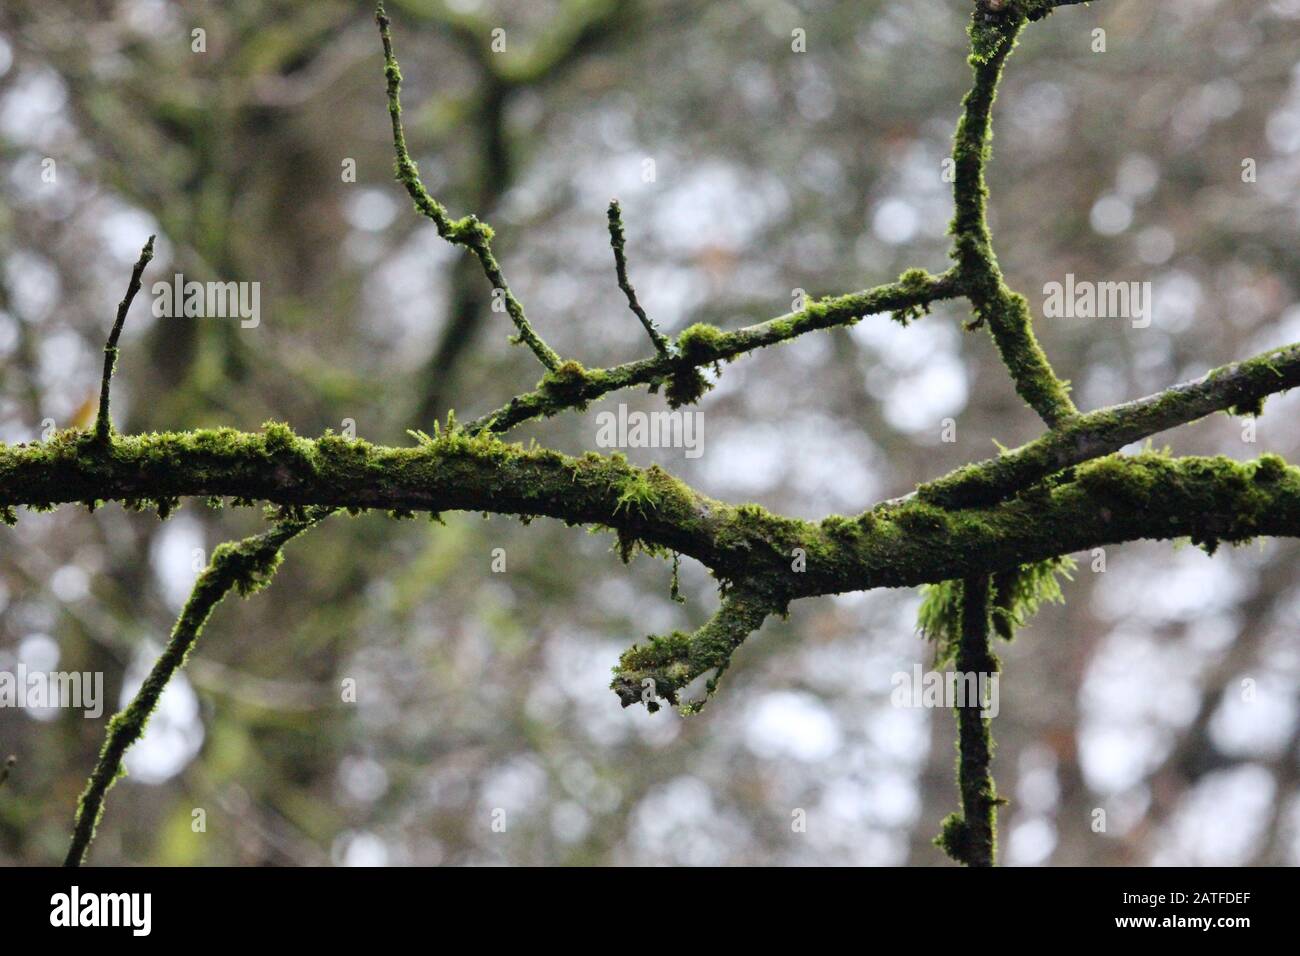 A photograph of a mossy tree branch.  Natural forest woodland background, on an overcast autumnal day Stock Photo